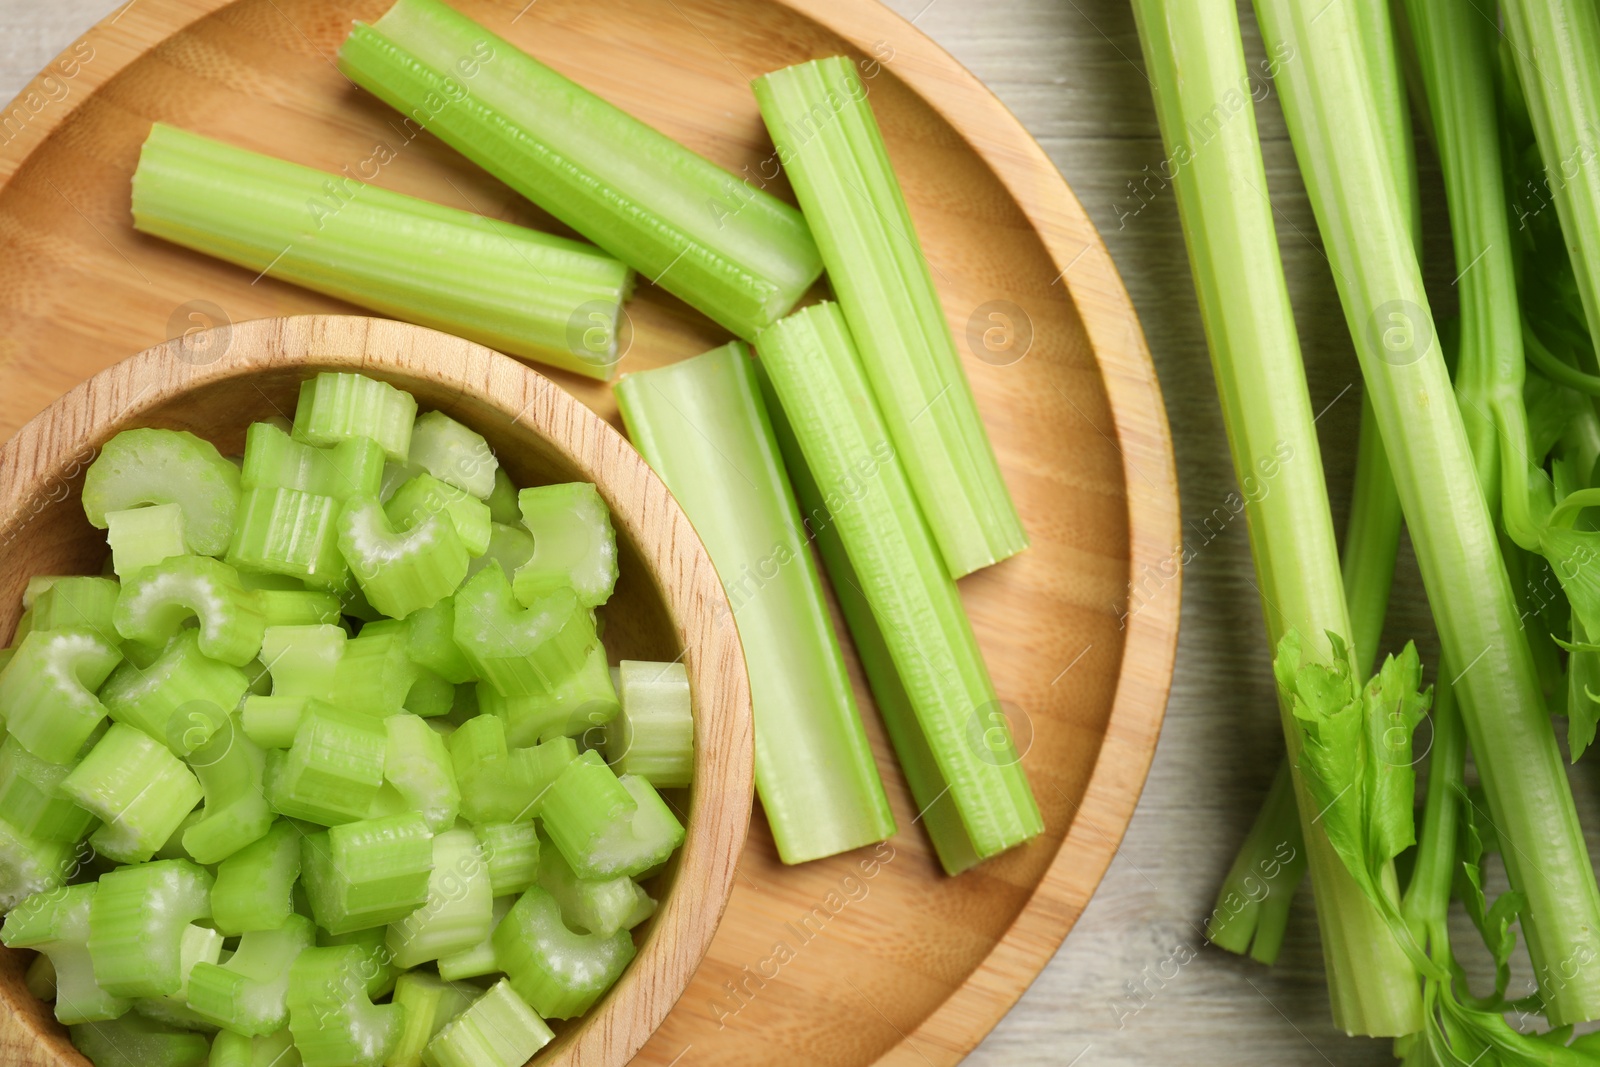 Photo of Many fresh cut celery stalks and leaves on wooden table, flat lay